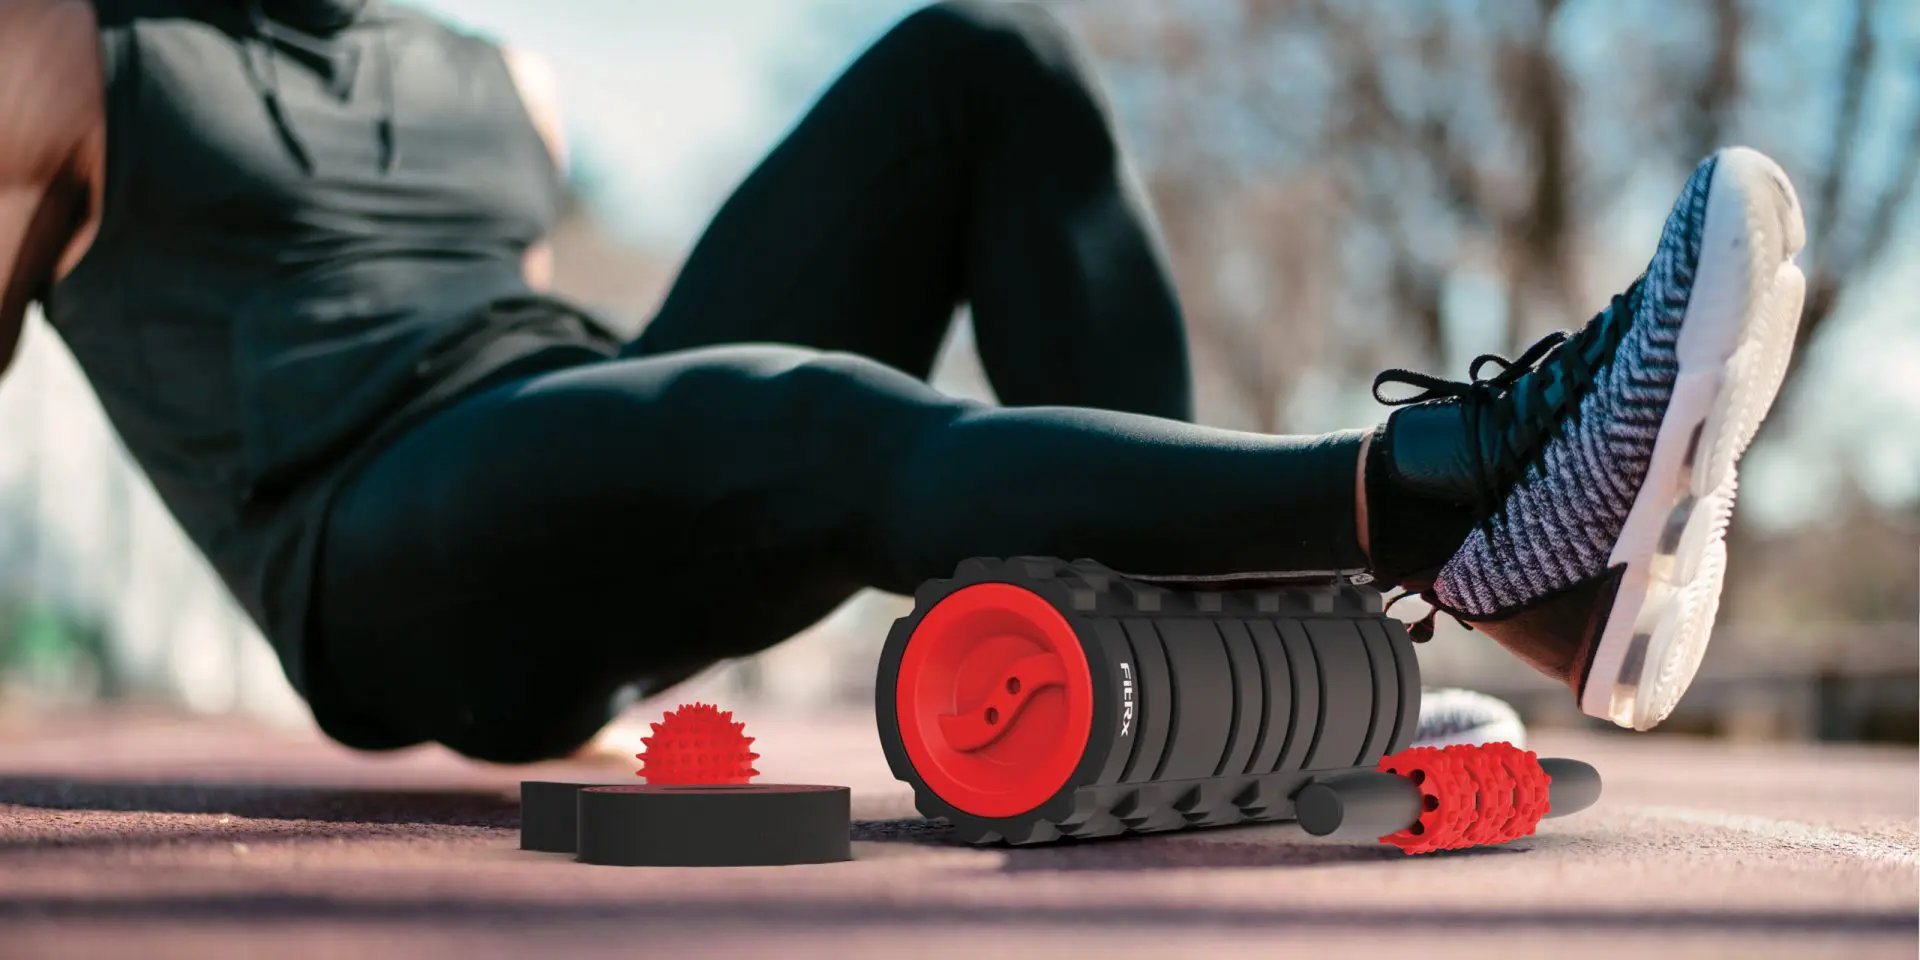 Using the Recovery Fitness Set’s foam roller and other tools to warm up before a long run will increase your circulation and leave you energized.